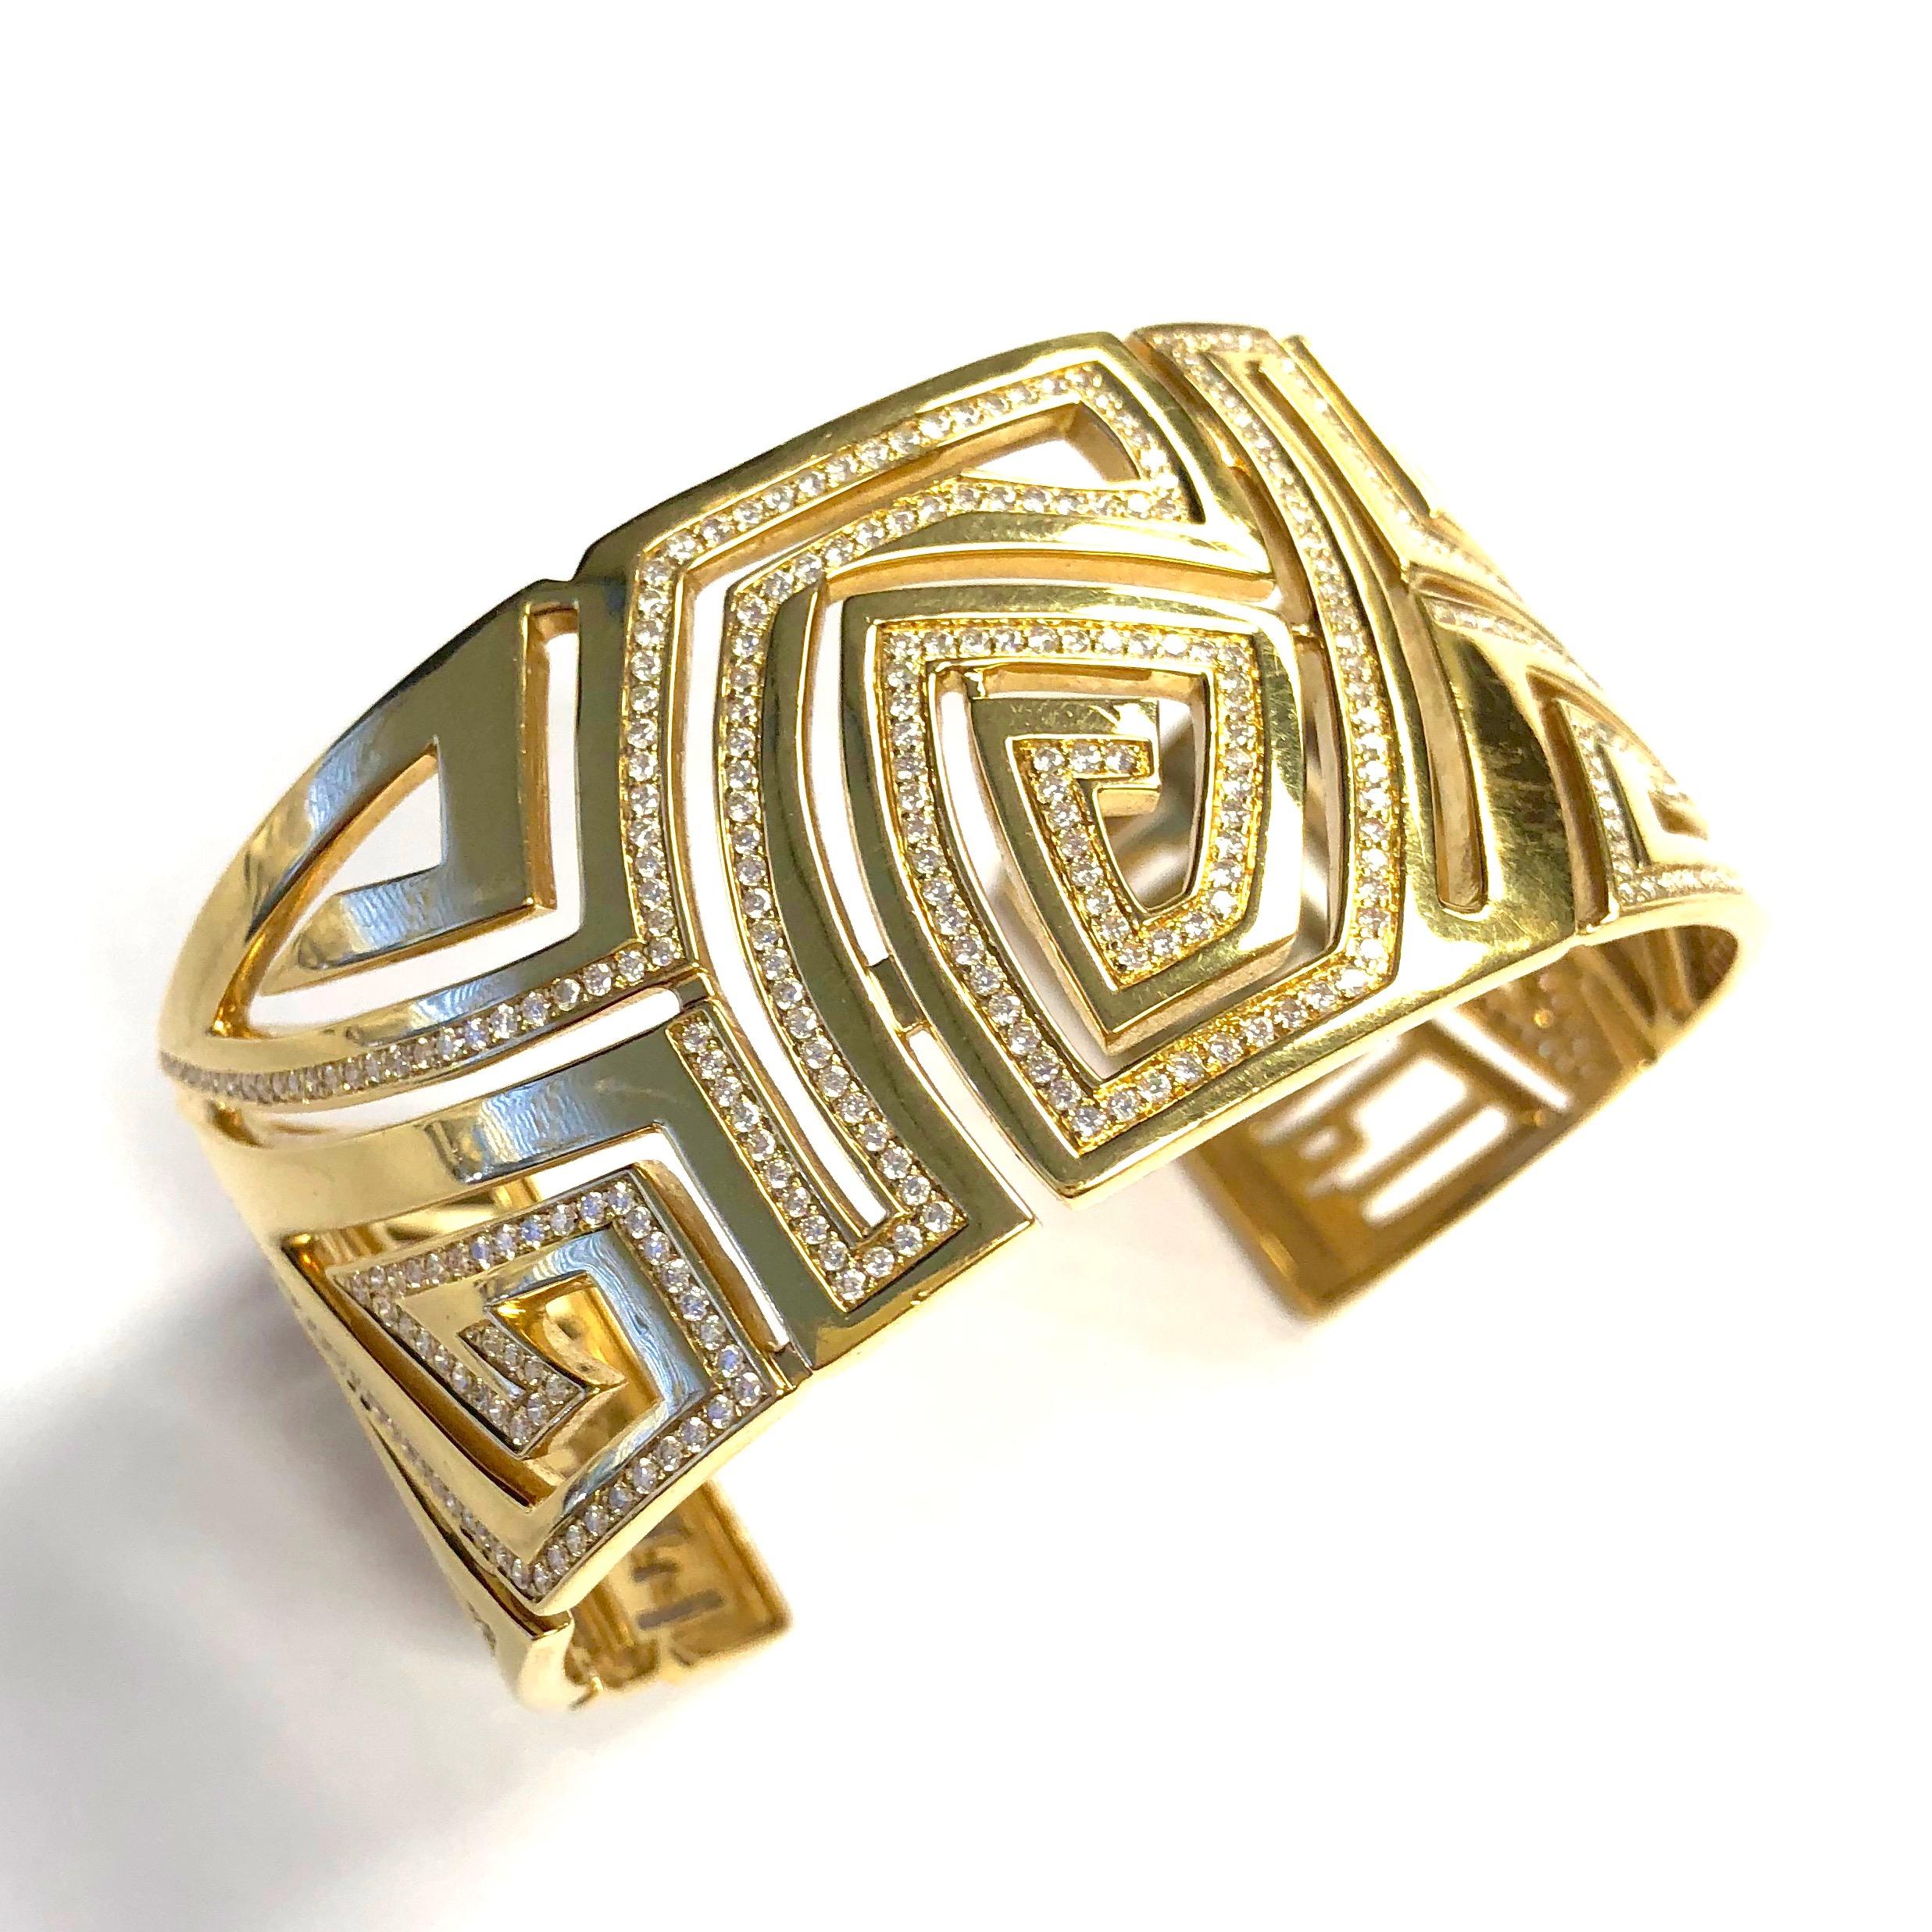 Amazing piece by corrupt design Jewelry, New York. Crafted in 18K yellow gold, the wide cuff bracelet features a cut-out design of diamond set geometric patterns, The company's name is also spelled out and set with diamonds at the ends. 
Approximate